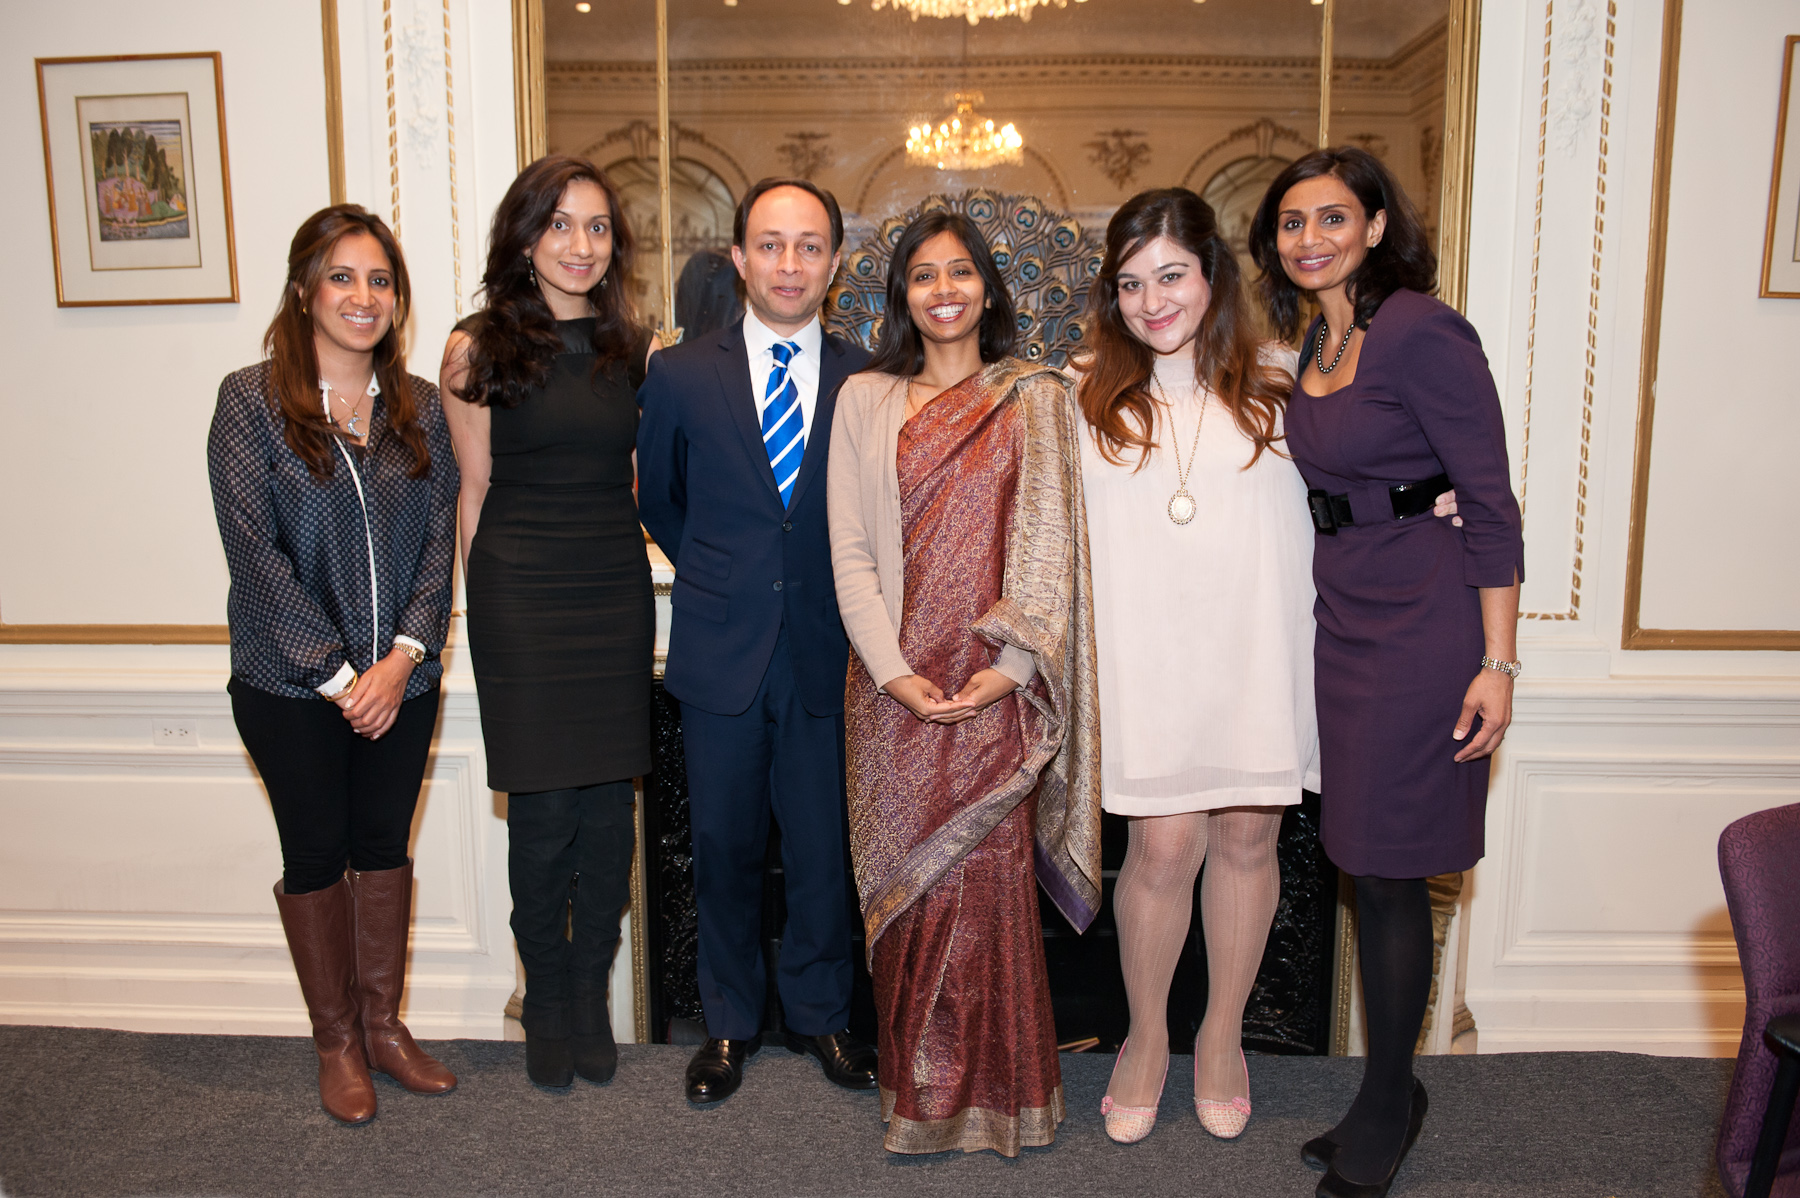 (from L to R) Amrita Singh (CEO of Amrita Singh Jewelry/SAY WE panelist), Benita Singh (CEO of Source4Style/SAY WE panelist), Rahul Baig (Head of Wells Fargo's Northeast Corporate Banking), Dr. Devyani Khobragade (Acting Consul General of India in New York), Reema Rasool (Founder of South Asian Young Women Entrepreneurs - SAY WE), Sital Patel (Market Watch Reporter, Wall Street Journal/SAY WE Moderator).